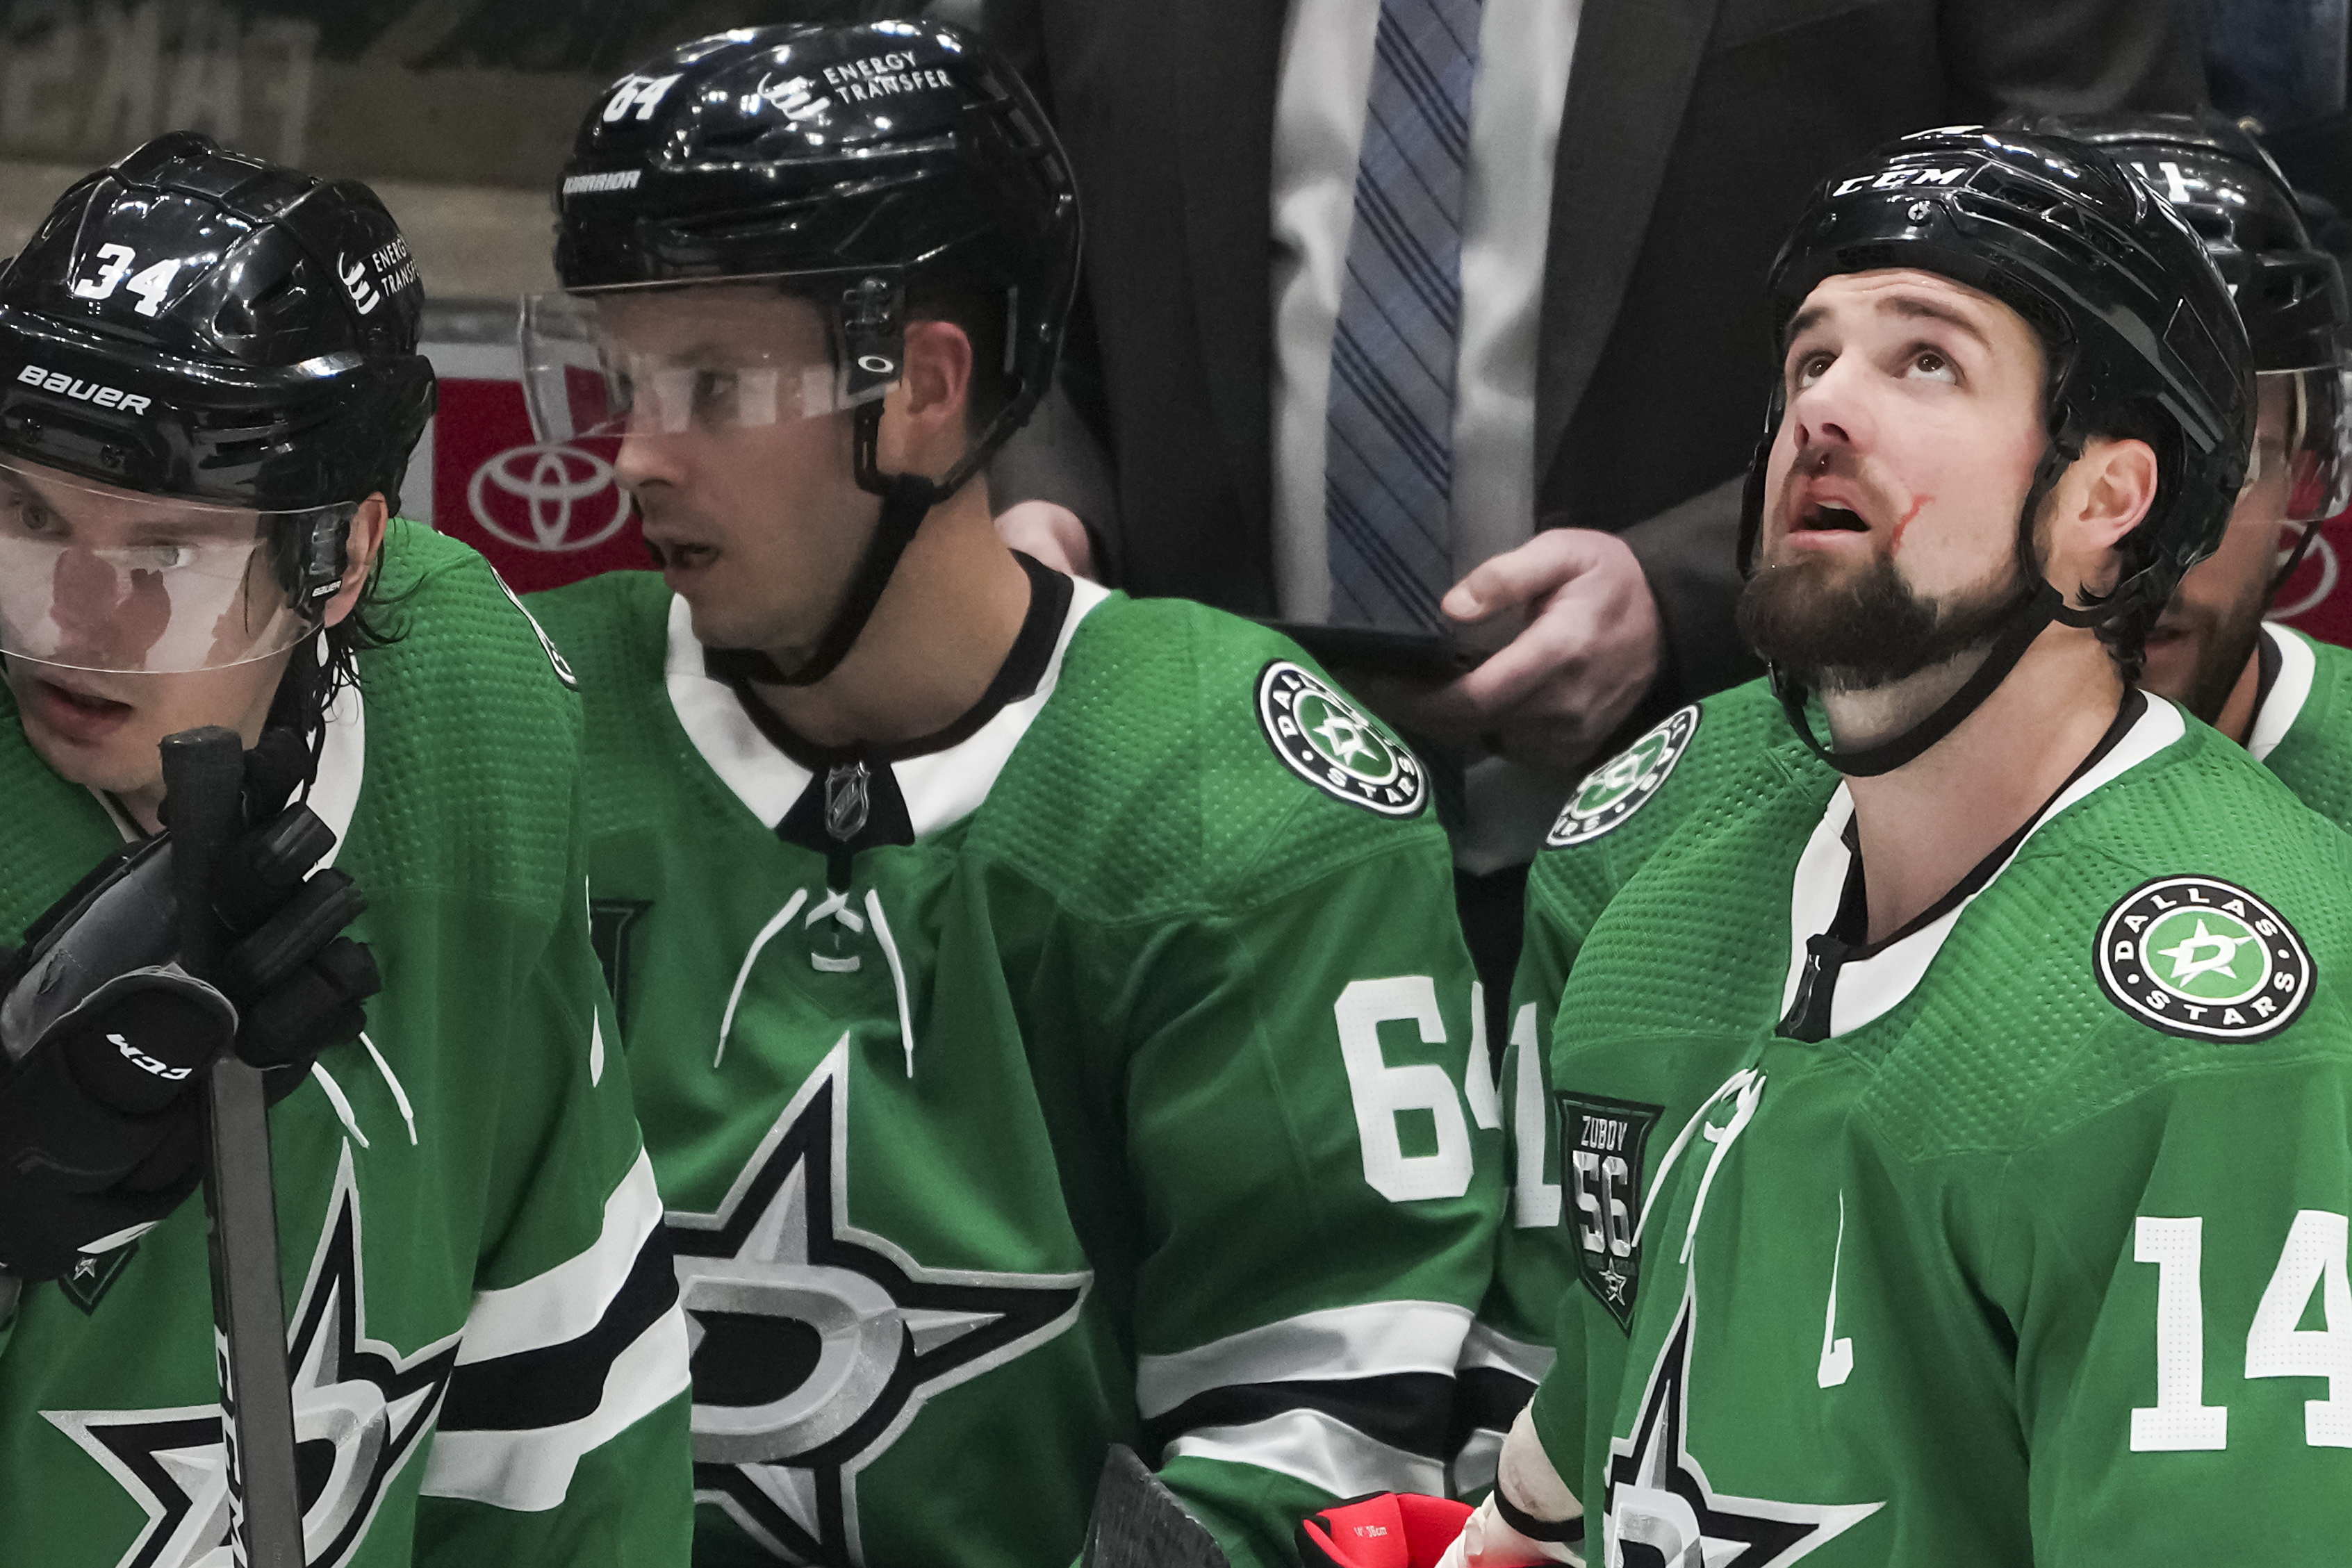 After honoring Sergei Zubov, Stars blowout loss to Capitals was a major buzzkill